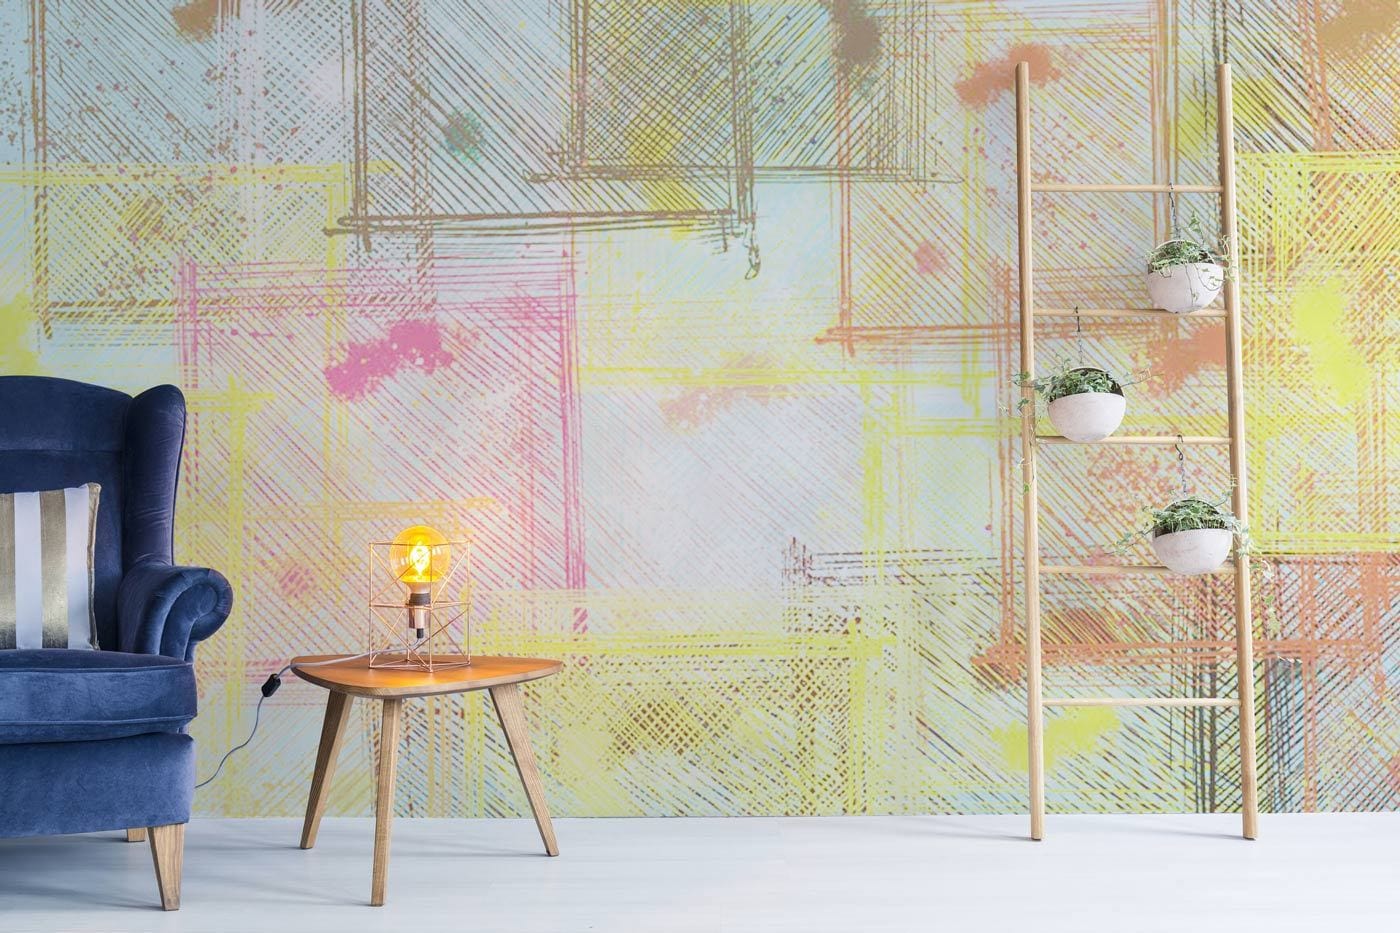 Wallpaper mural made of mesh fabric with an abstract design, perfect for the living room.